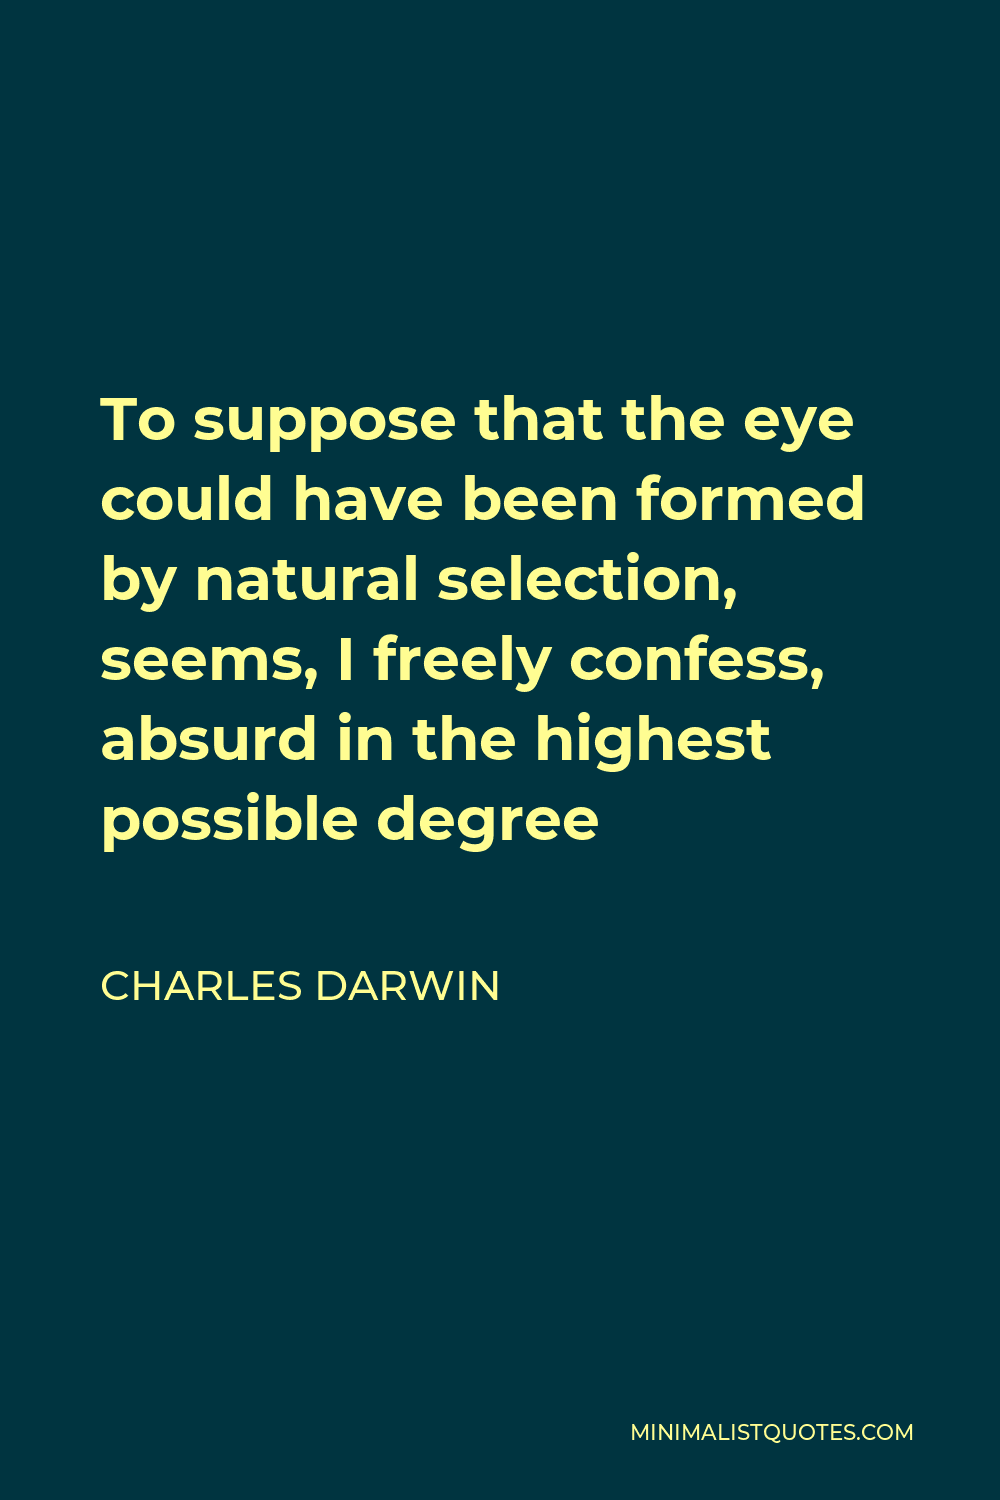 Charles Darwin Quote - To suppose that the eye could have been formed by natural selection, seems, I freely confess, absurd in the highest possible degree